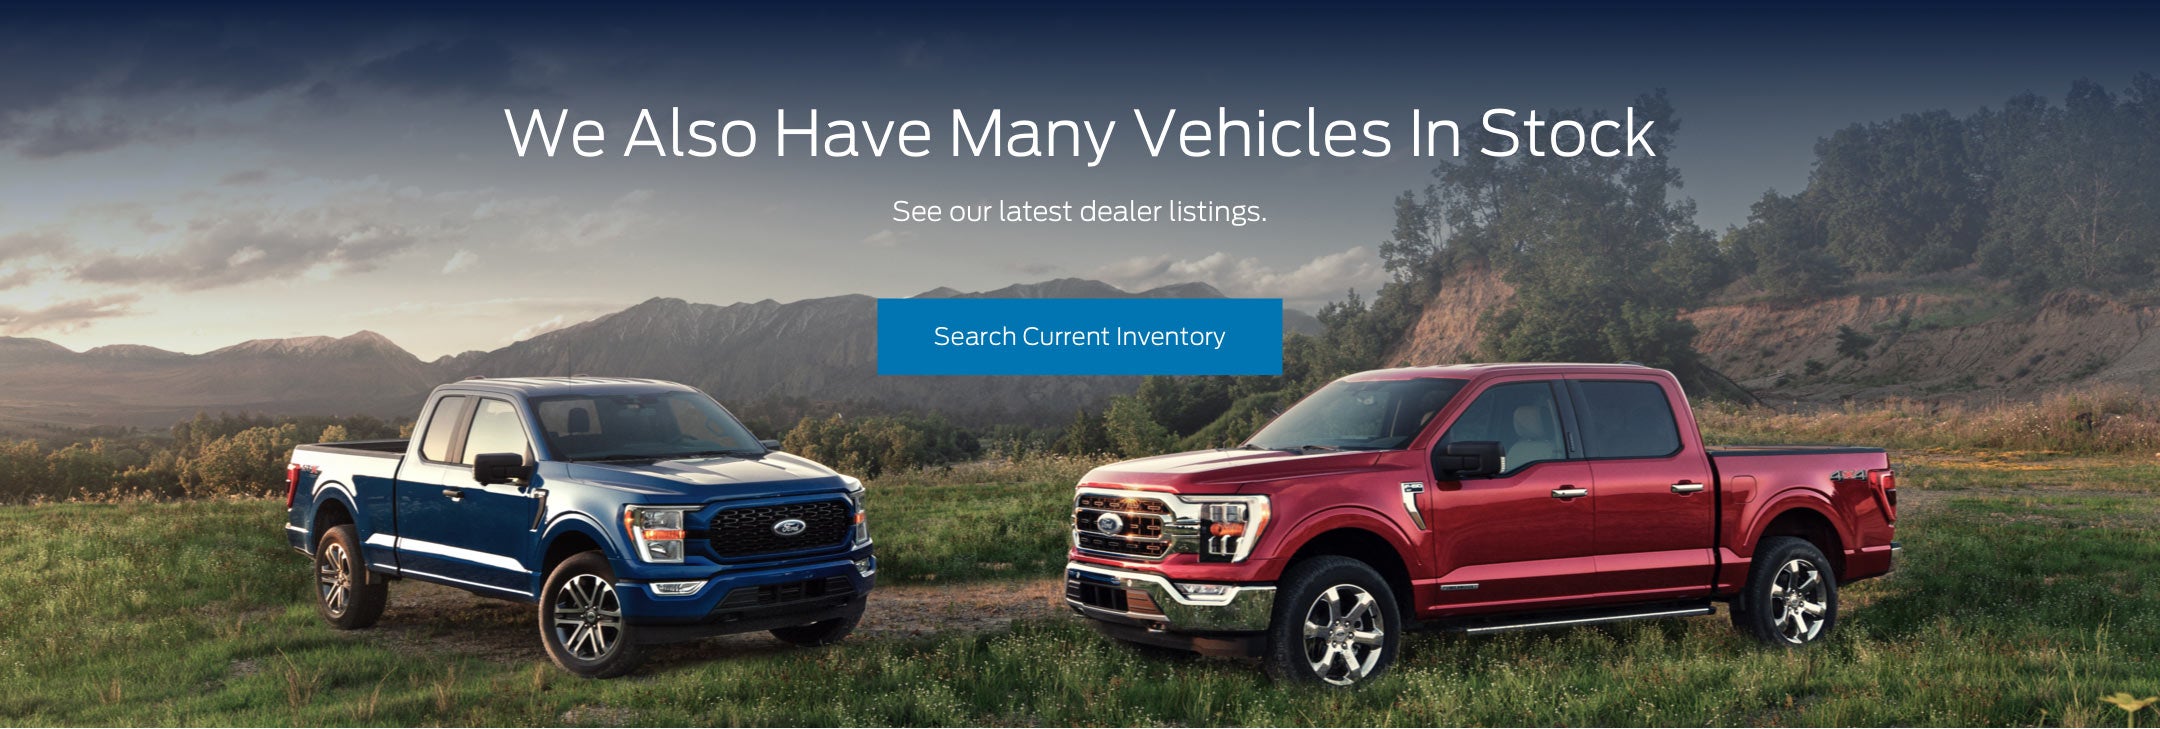 Ford vehicles in stock | Jack Powell Ford in Mineral Wells TX